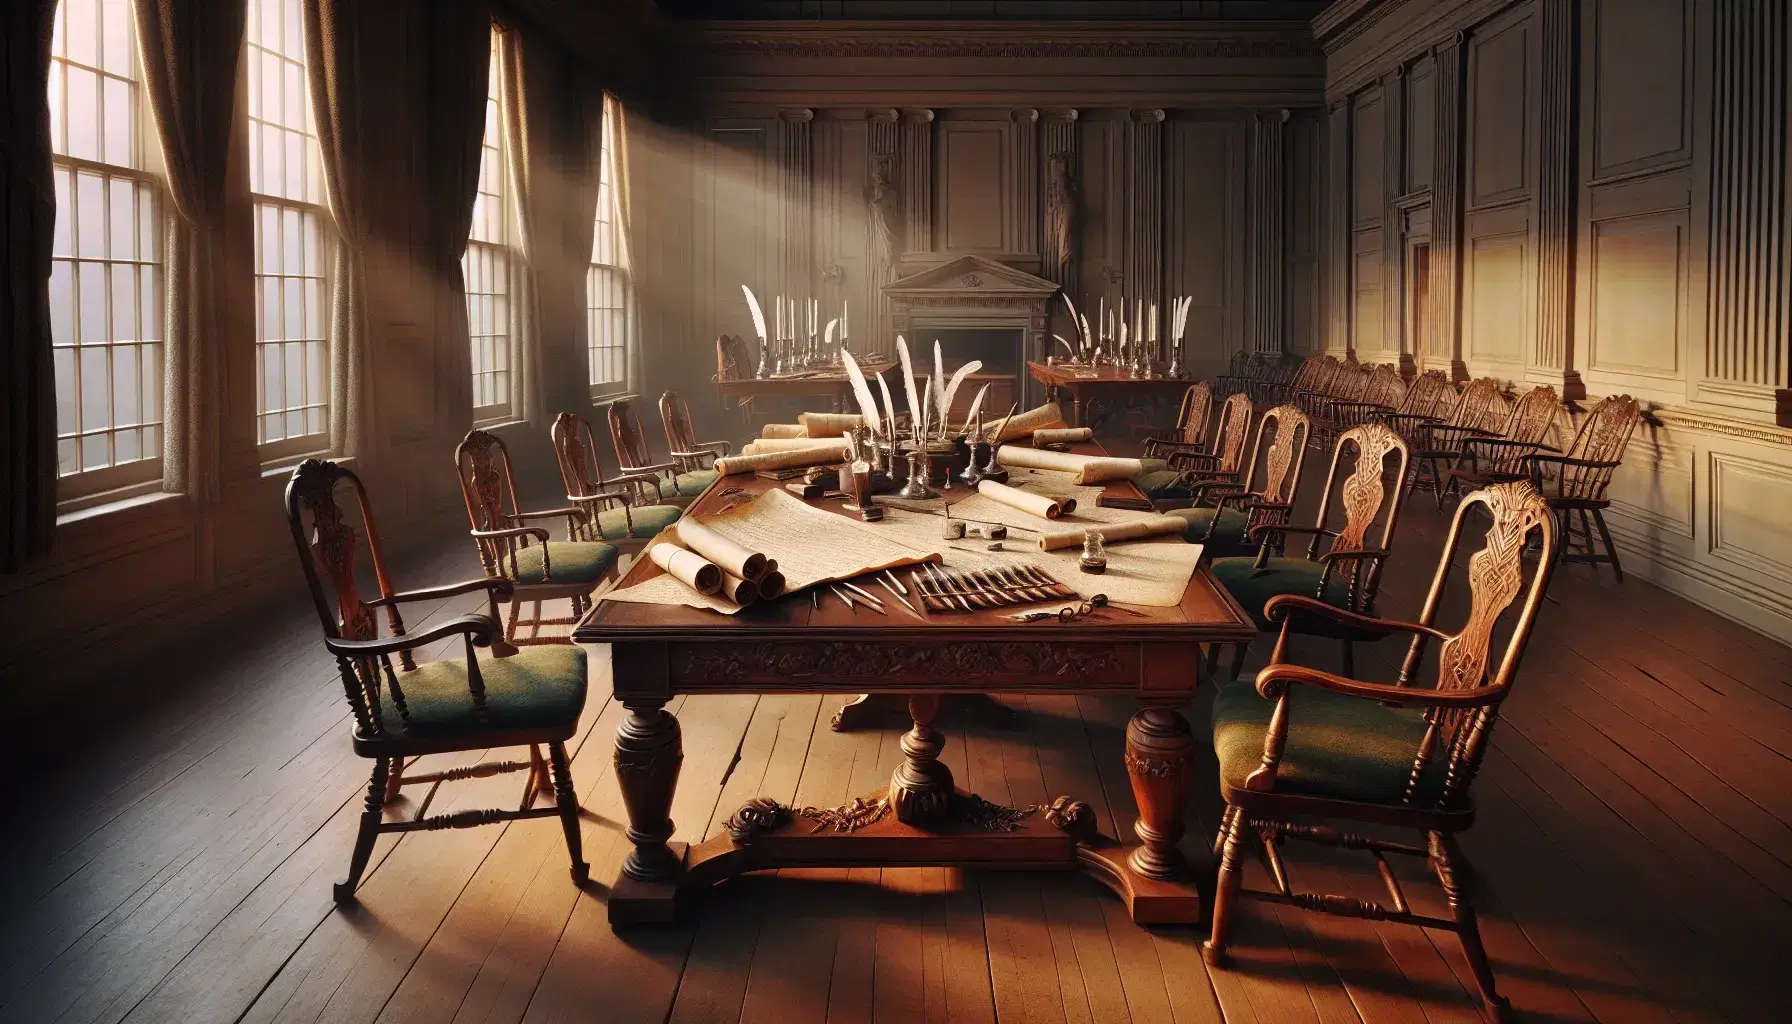 Late 18th-century scene in Independence Hall with a central wooden table, quill pens, sealed parchments, and high-backed chairs in a sunlit room.